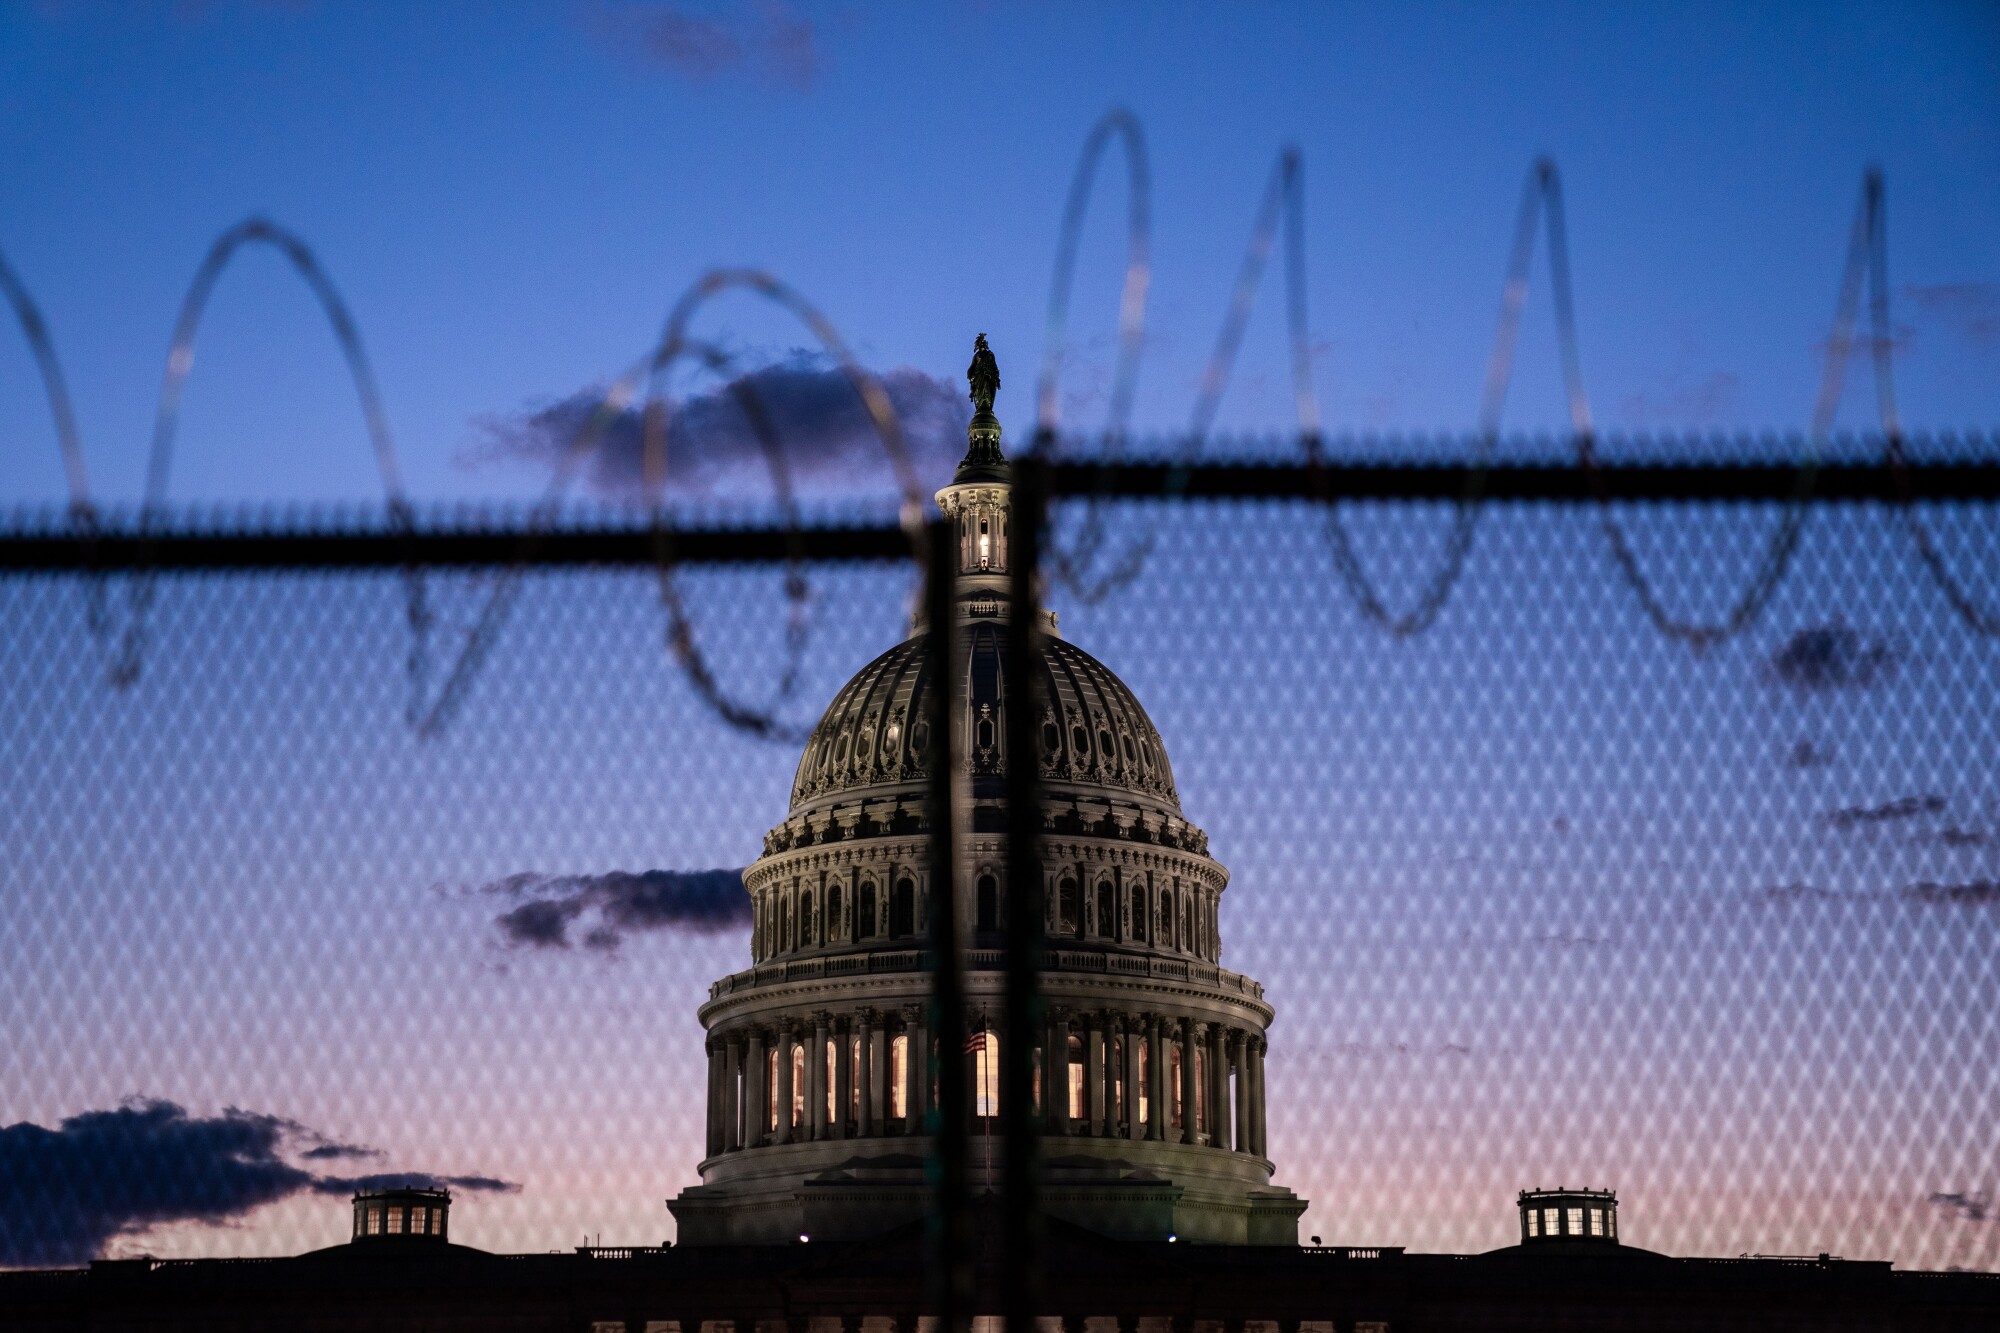 The Capitol dome stands behind a razor wire fence against a purple and pink sunset